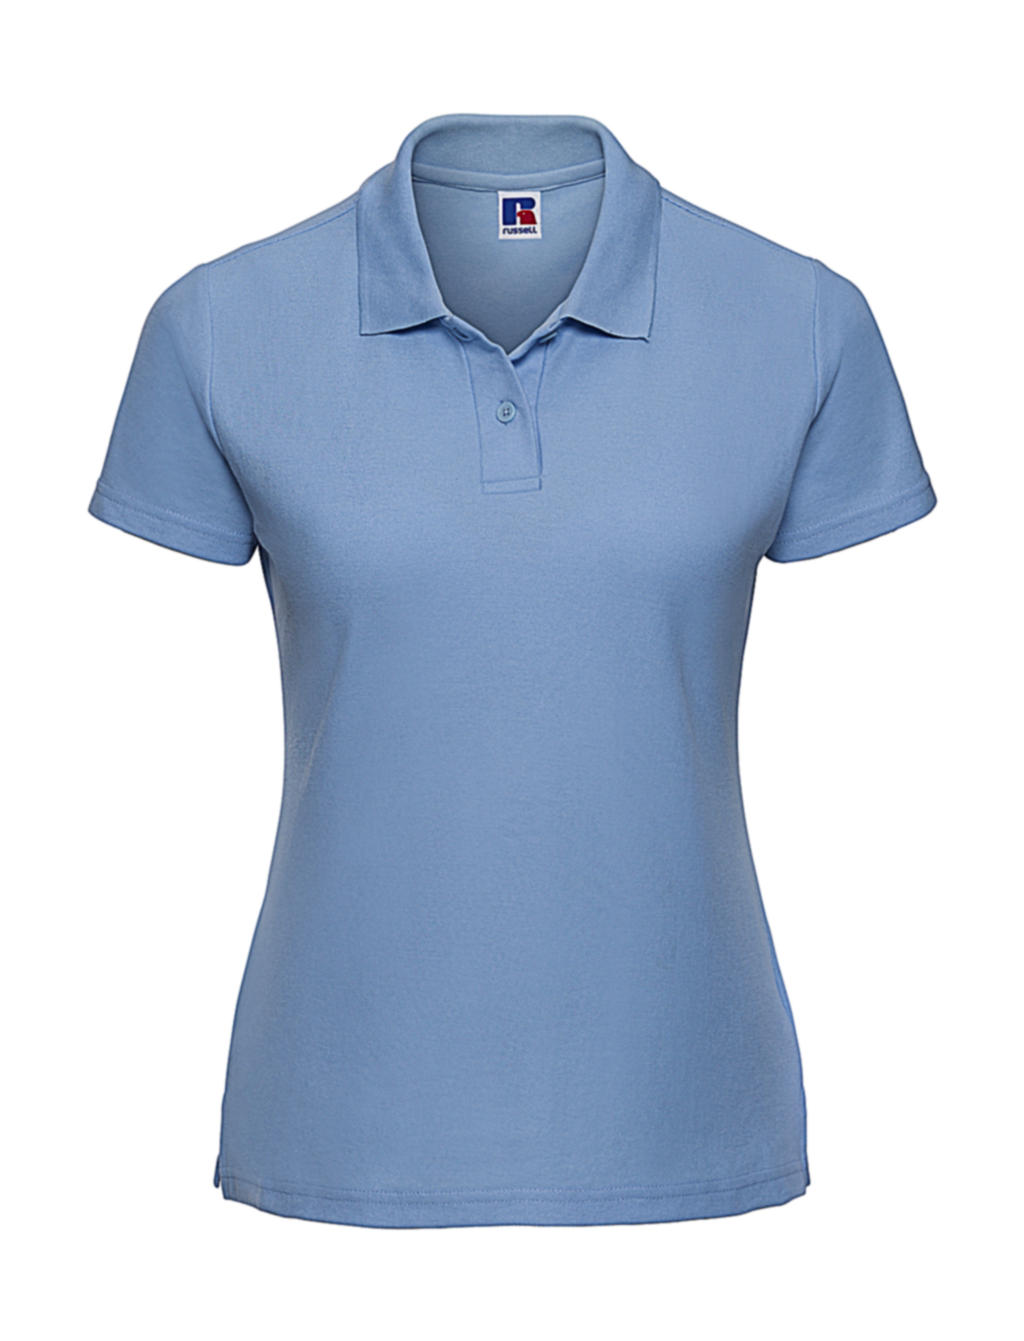  Ladies Classic Polycotton Polo in Farbe Sky